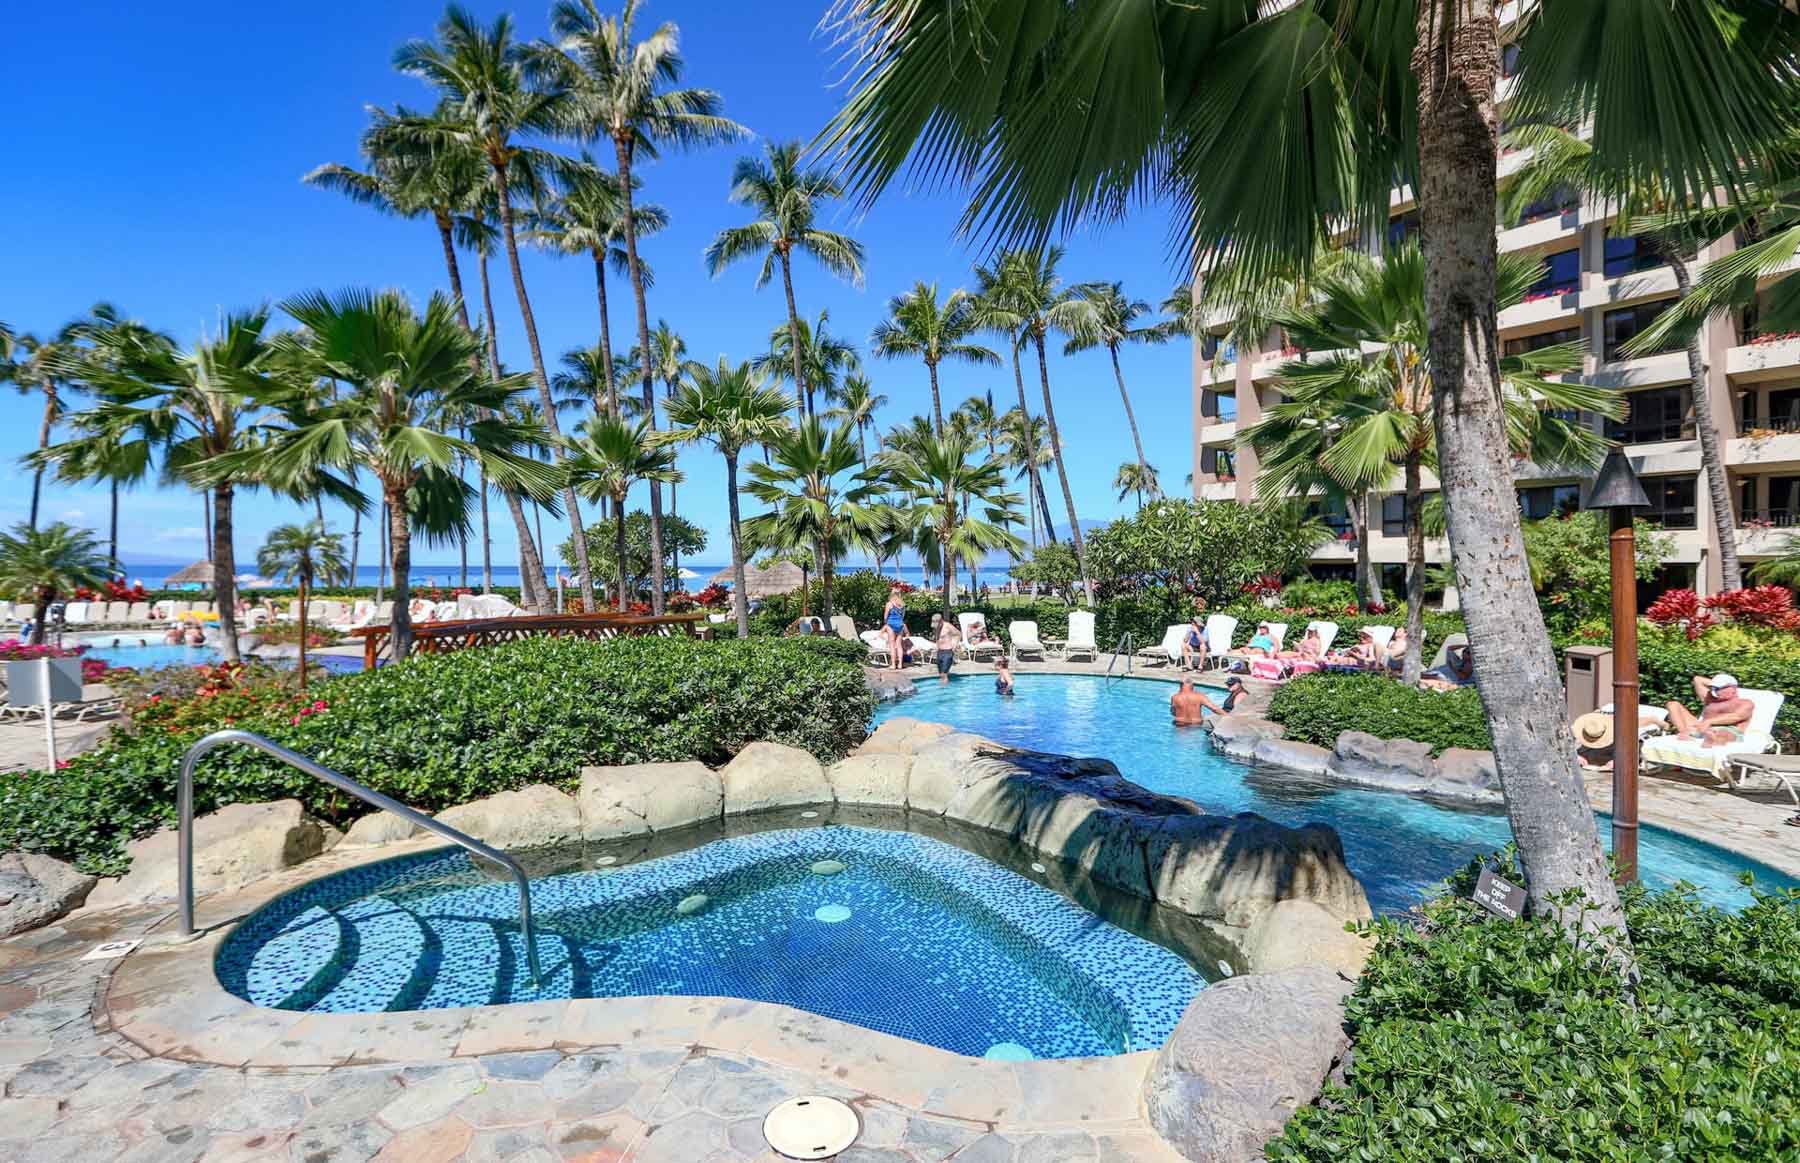 Maui Tropical resort with wading pool and palm trees